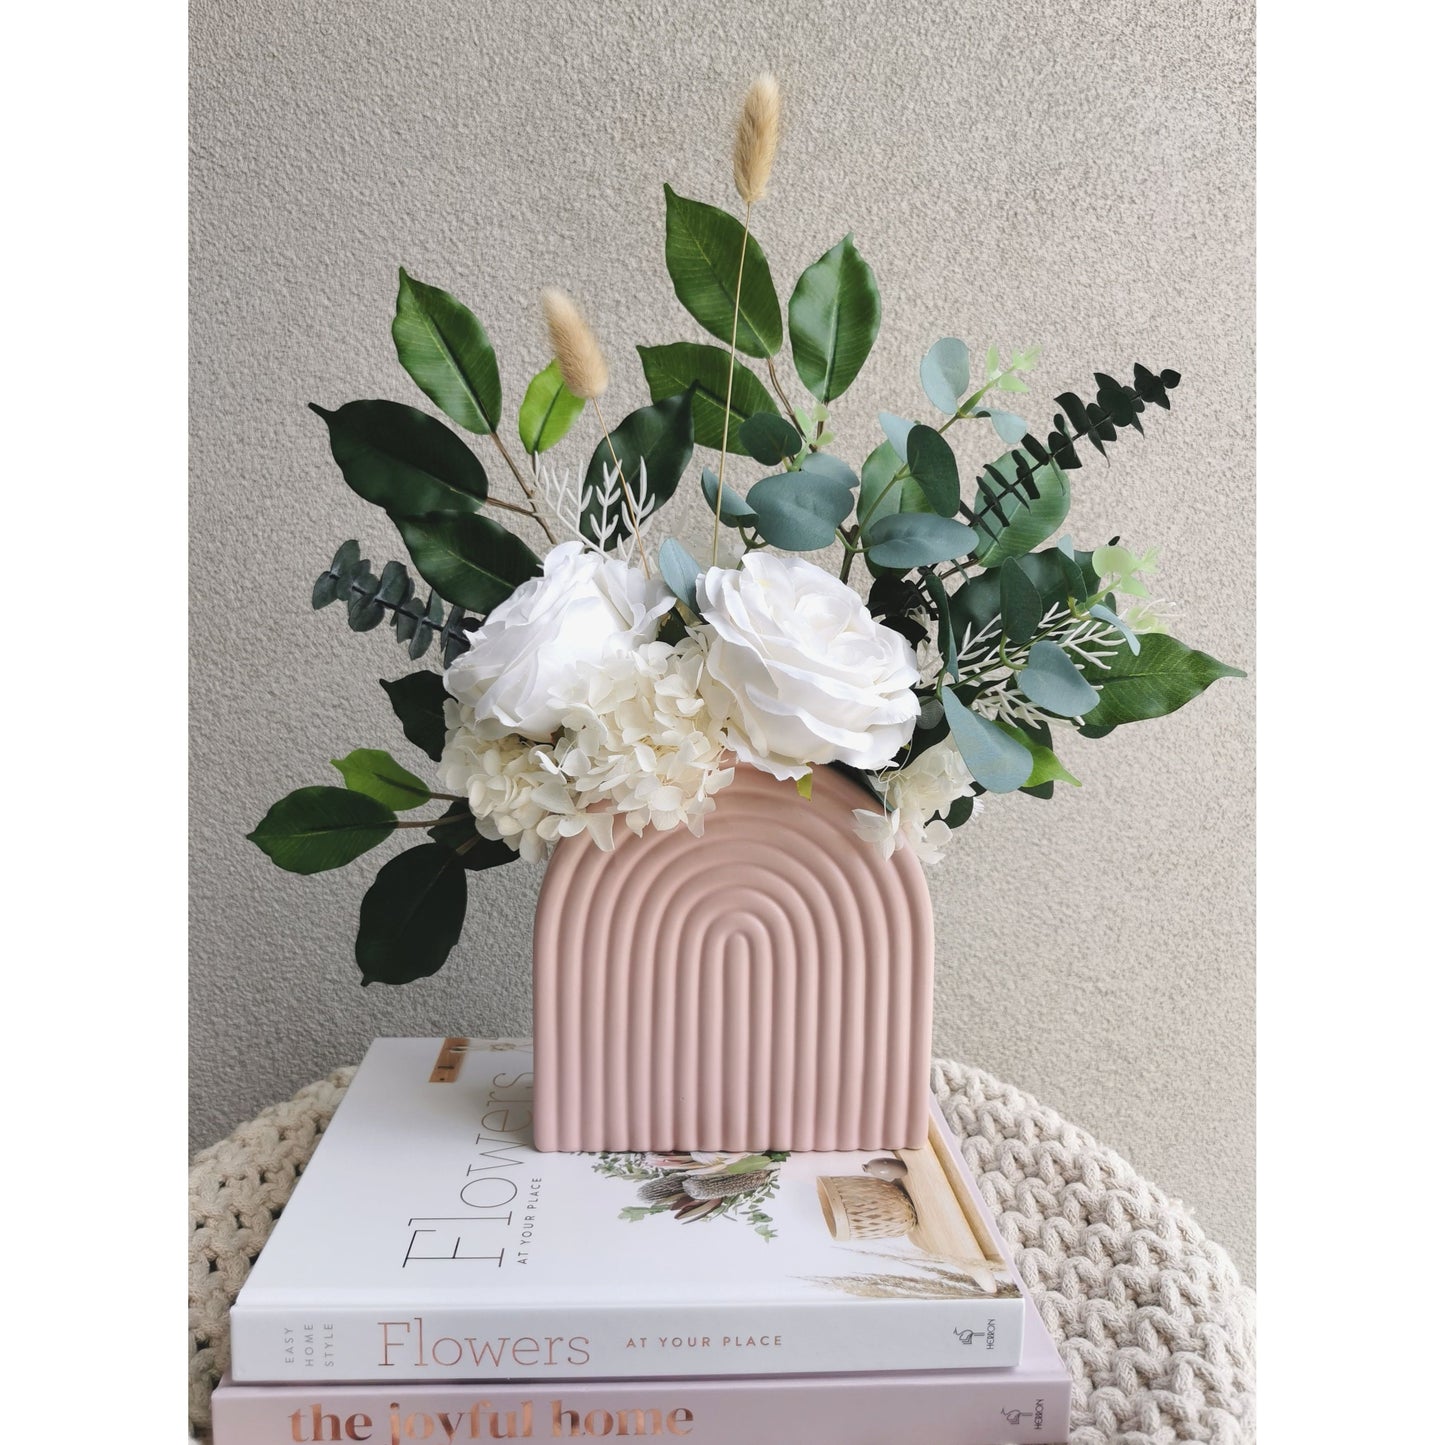 Green & white flowers consisting of dried, preserved and artificial flowers and set in to a pink arch vase. Picture shows the flower arrangement sitting on design books on a table against a blank wall